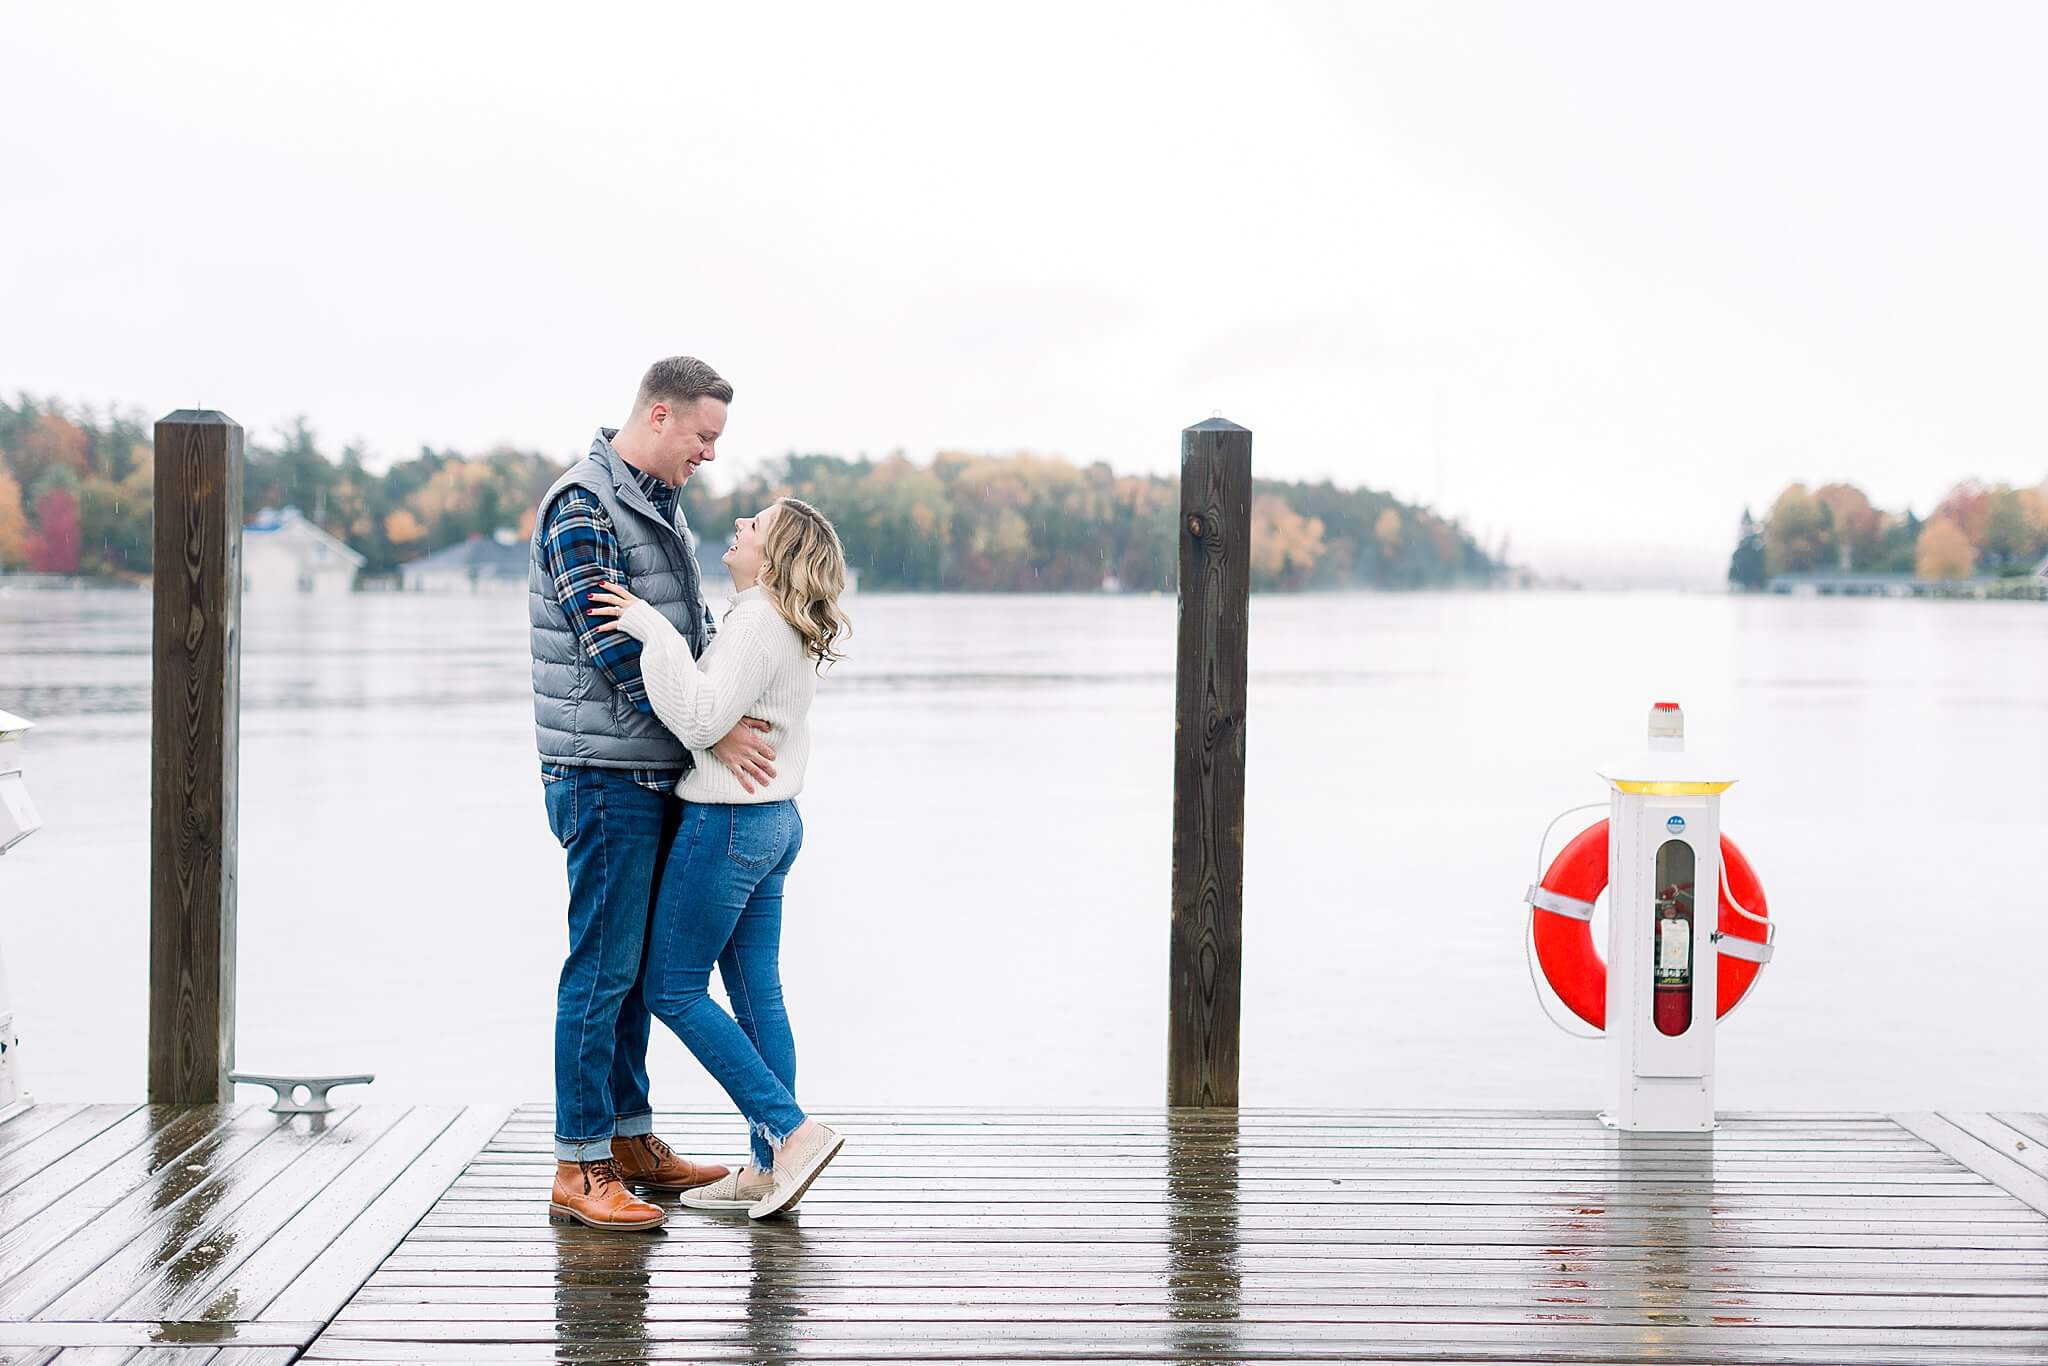 Bride smiles at groom during rainy fall engagement session in Charlevoix, Michigan.